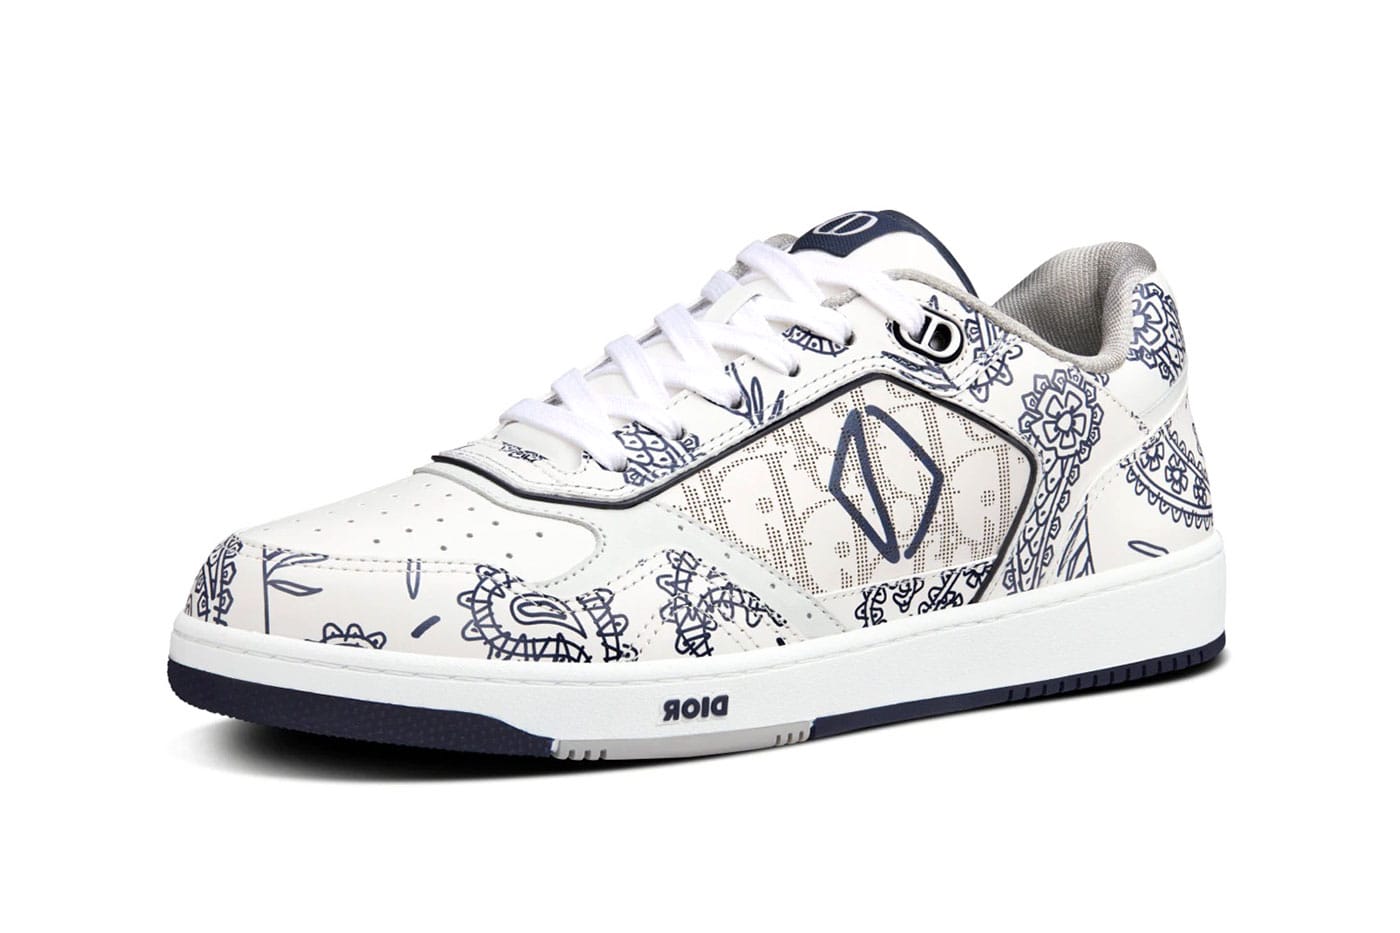 Dior SS22 Paisley Print B27 Low Tops Release | Hypebeast